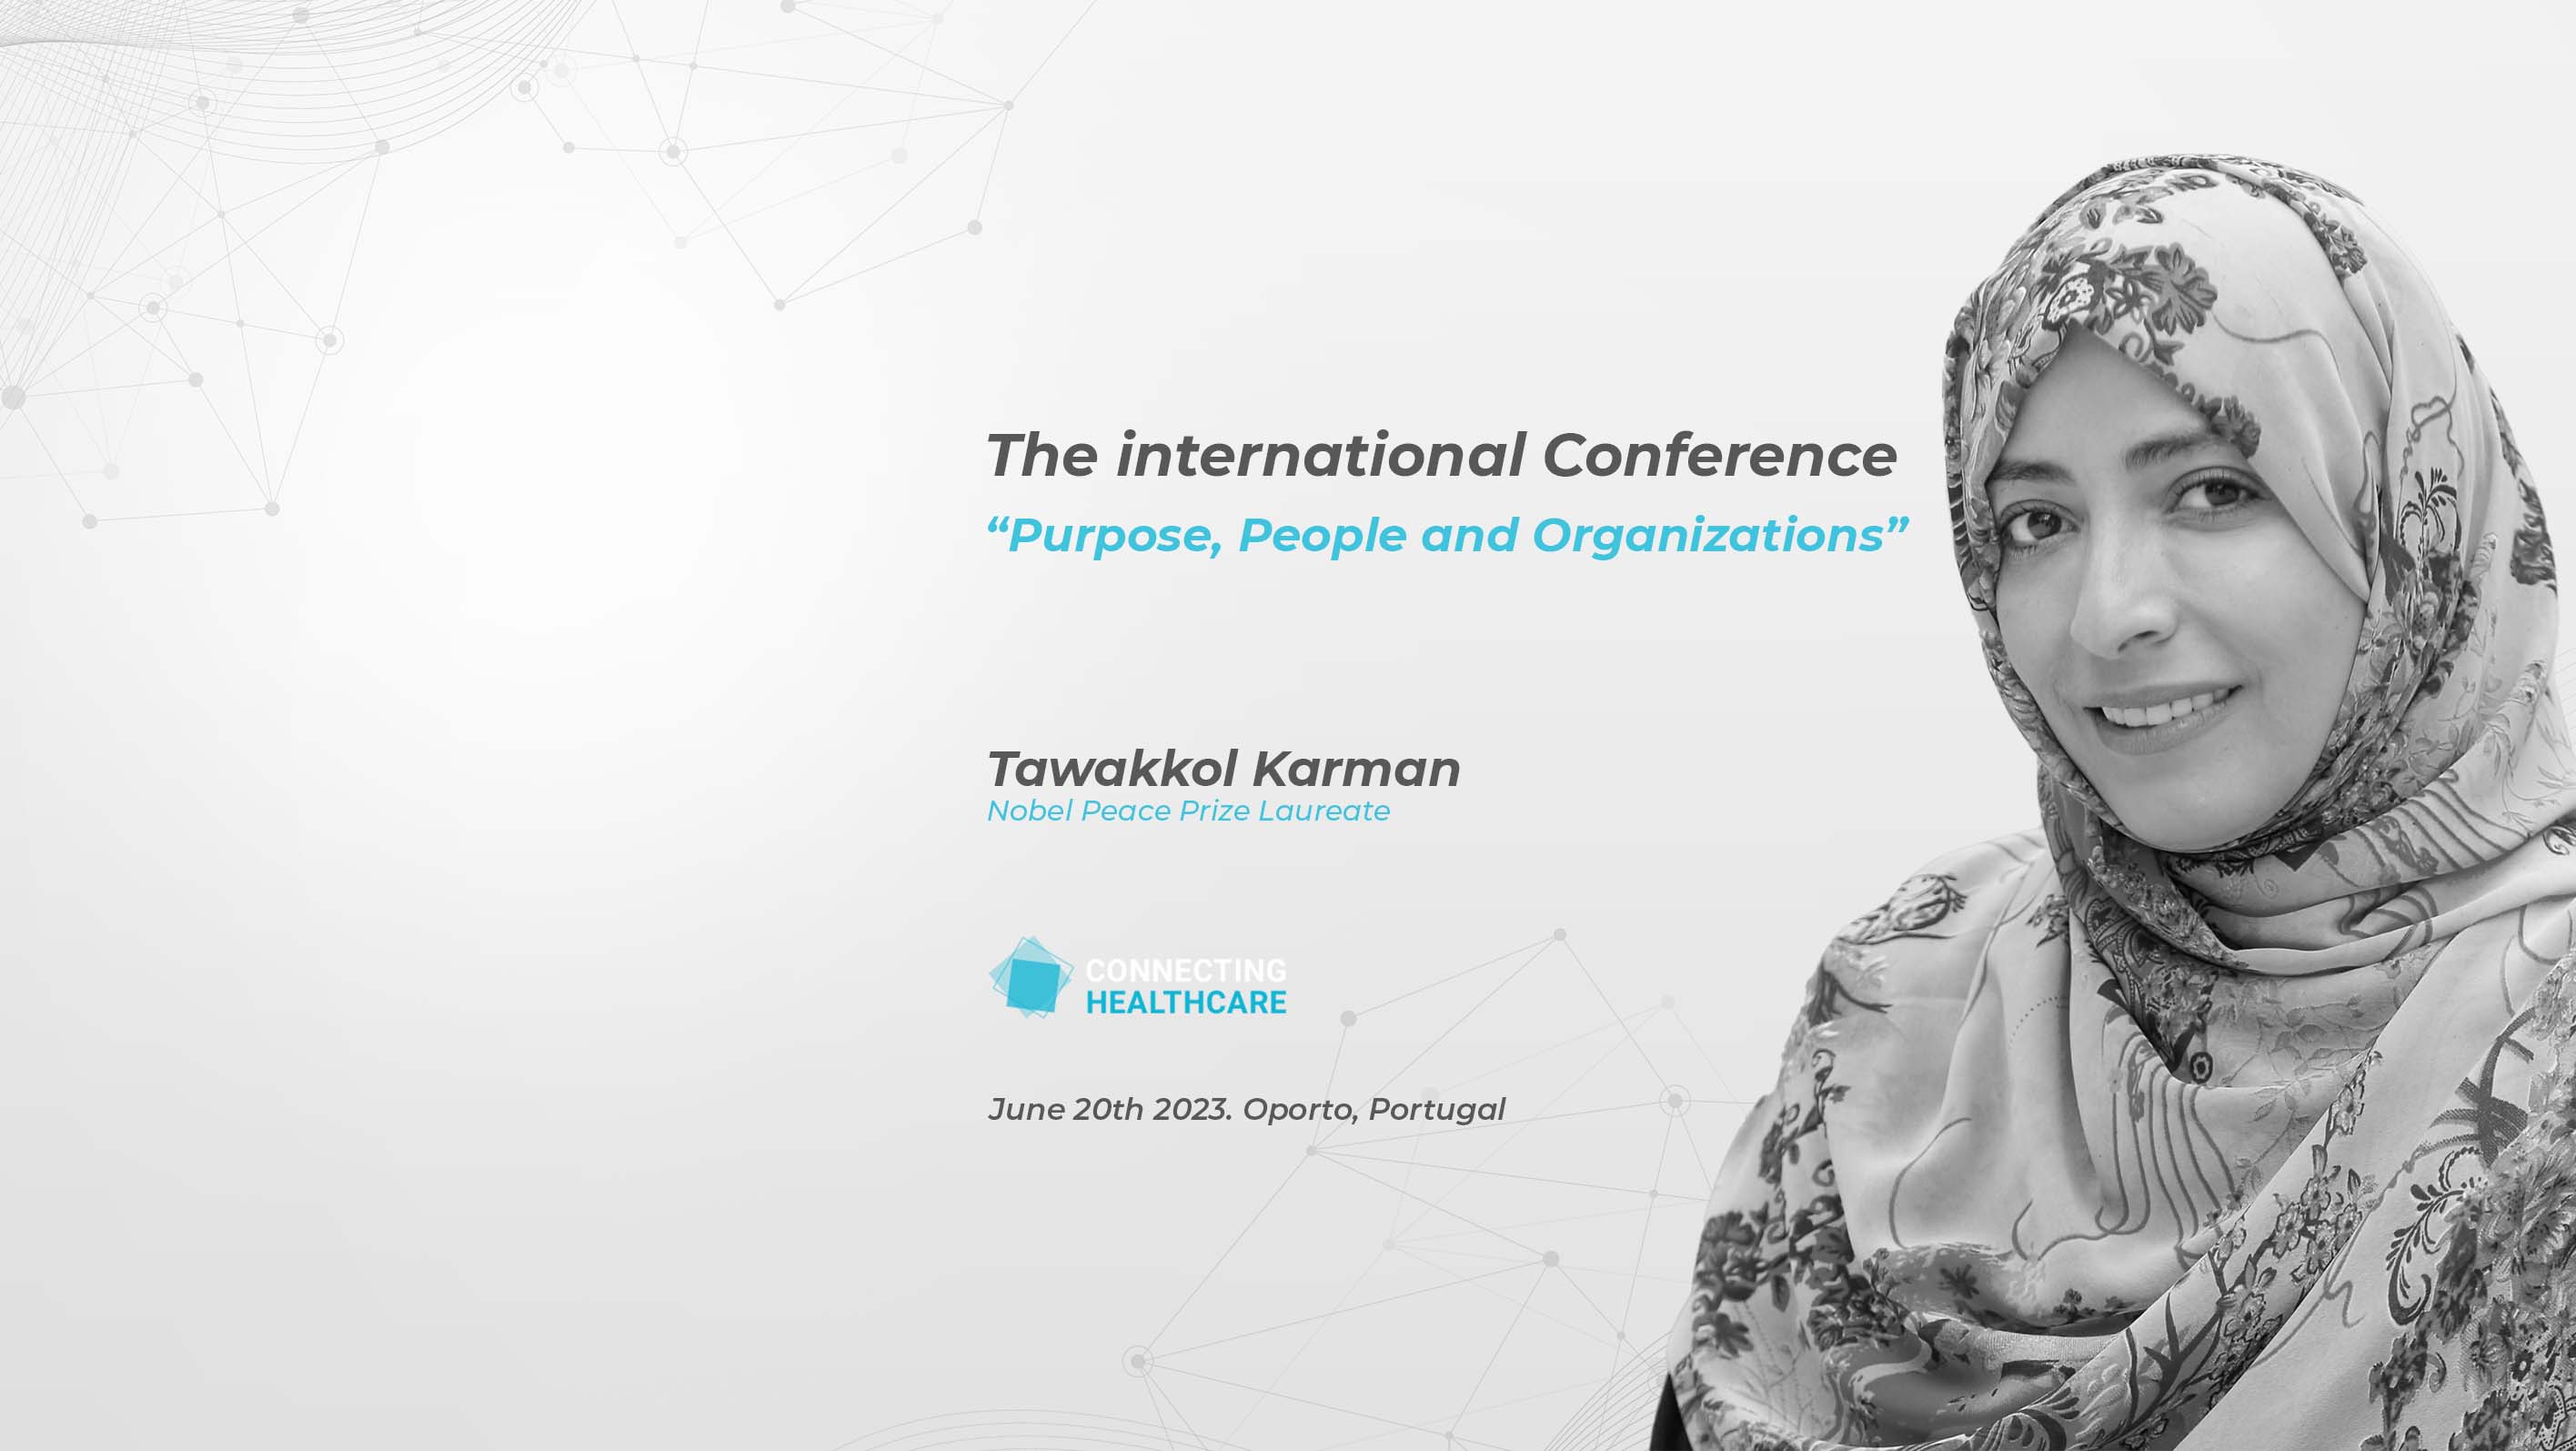 Karman to be keynote speaker at conference in Portugal